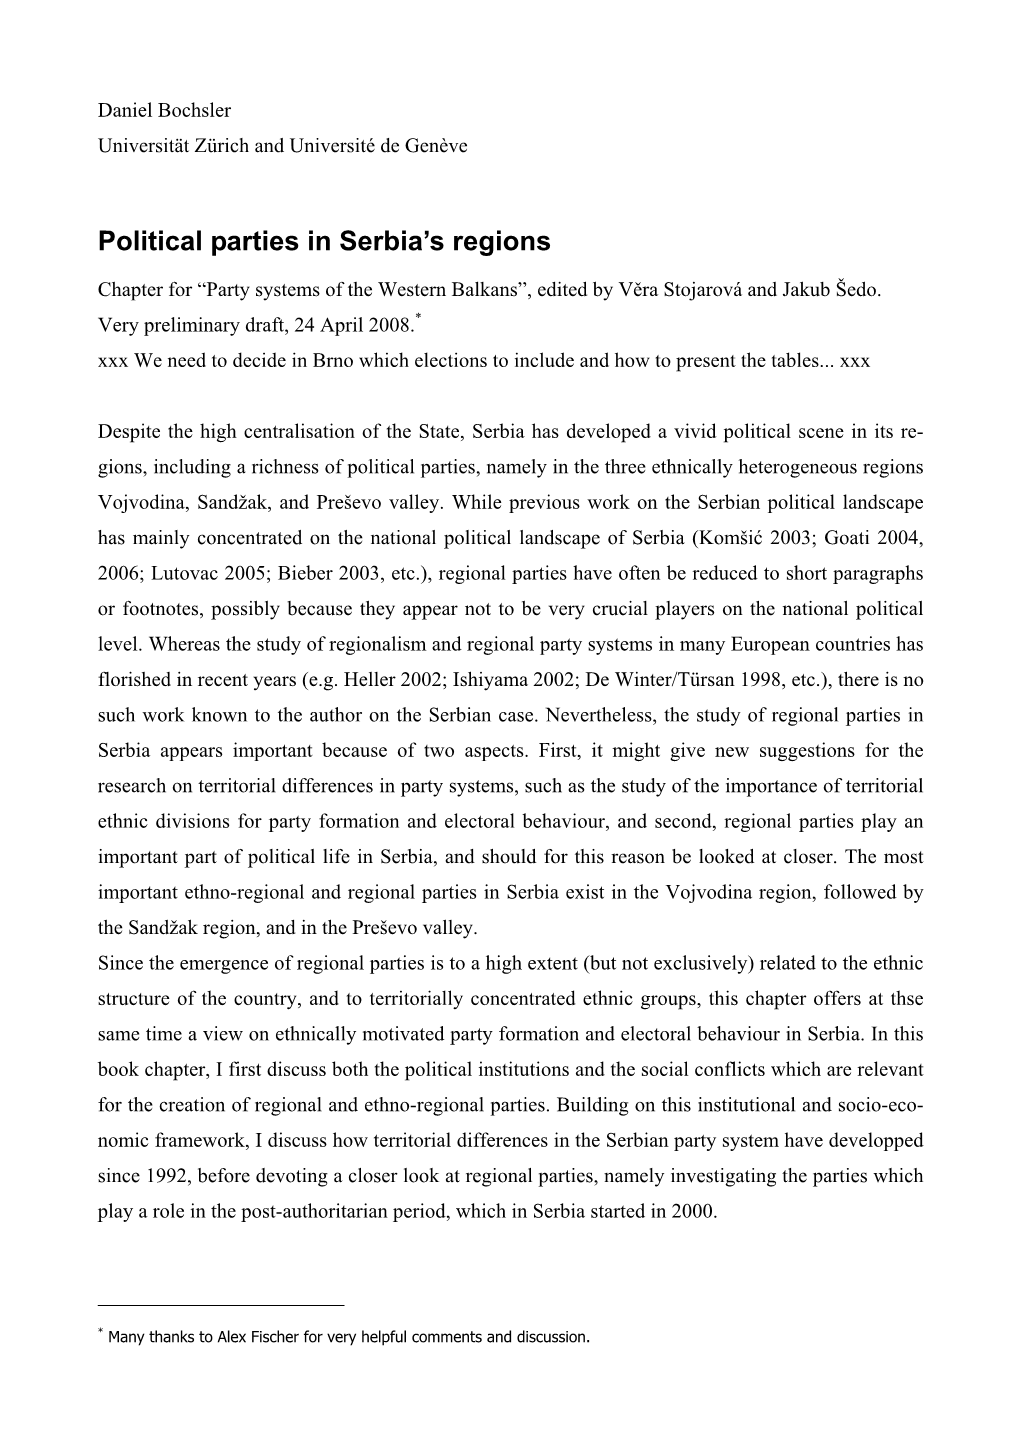 Political Parties in Serbia's Regions